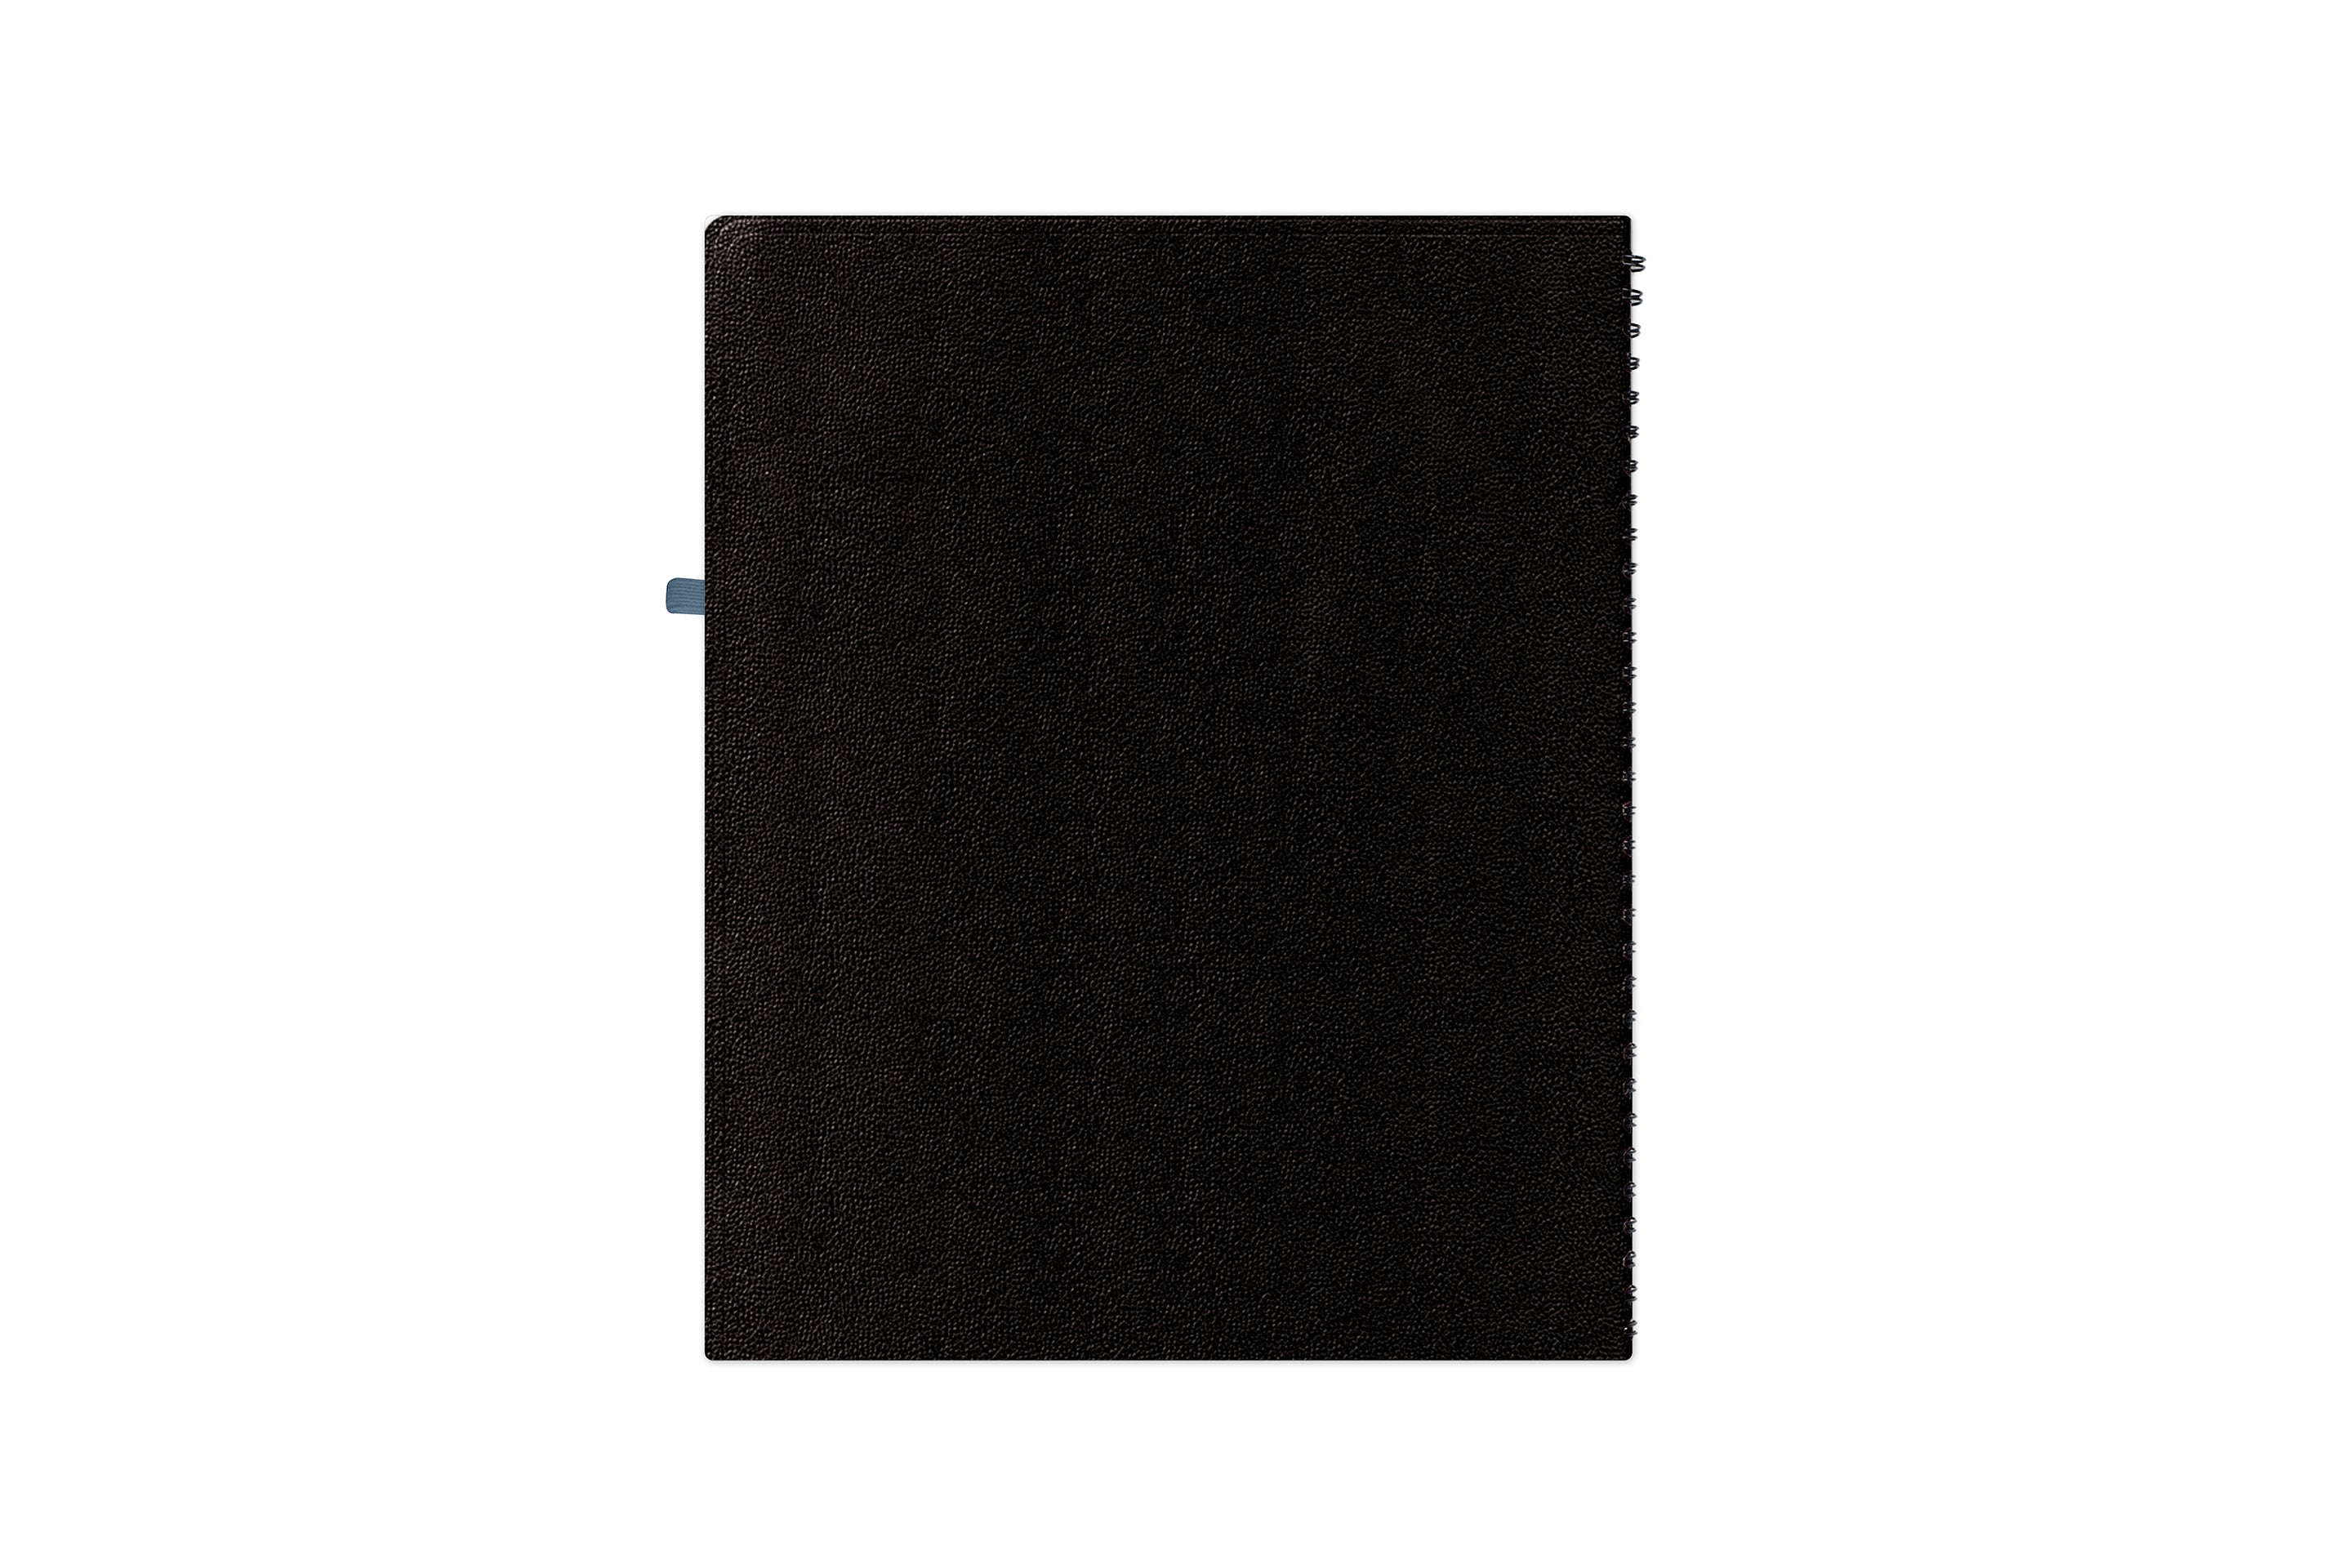 Classy and executive black pajco lexide navy cover for this 2023 vertical appointment planner in 8.5x11size from Blue Sky